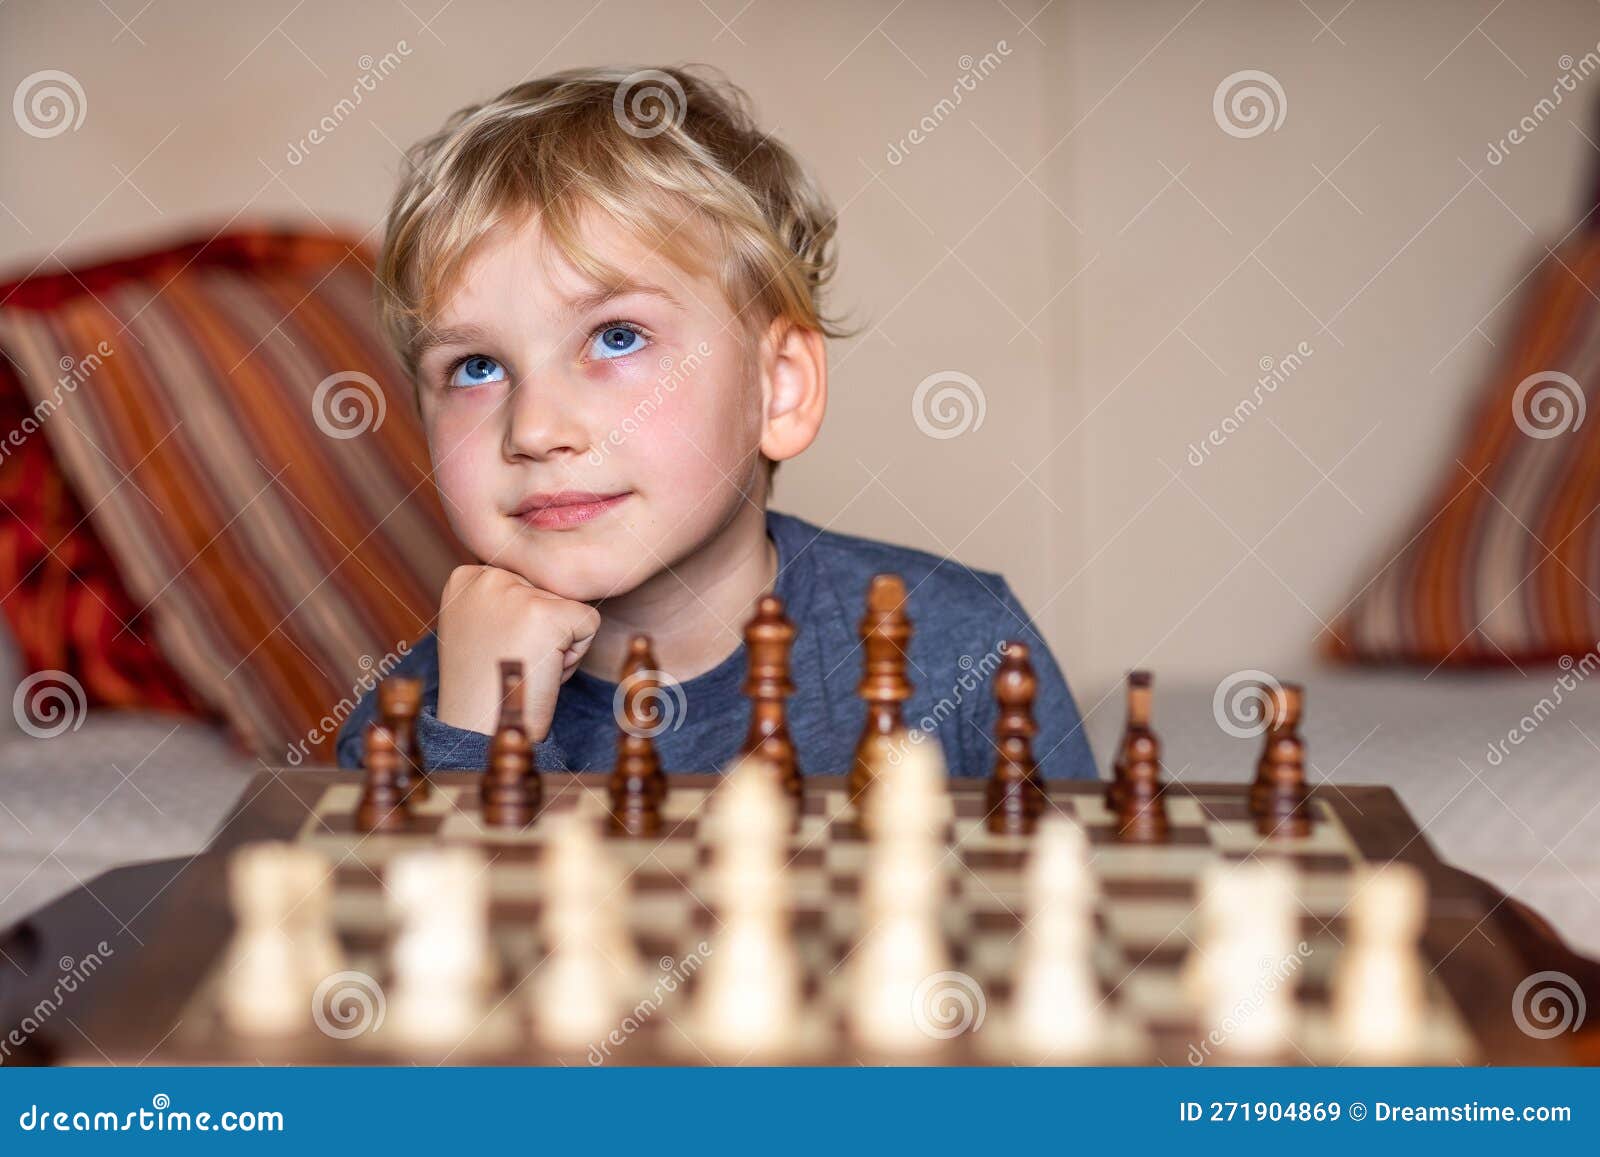 Small Child 5 Years Old Playing A Game Of Chess On Large Chess Board